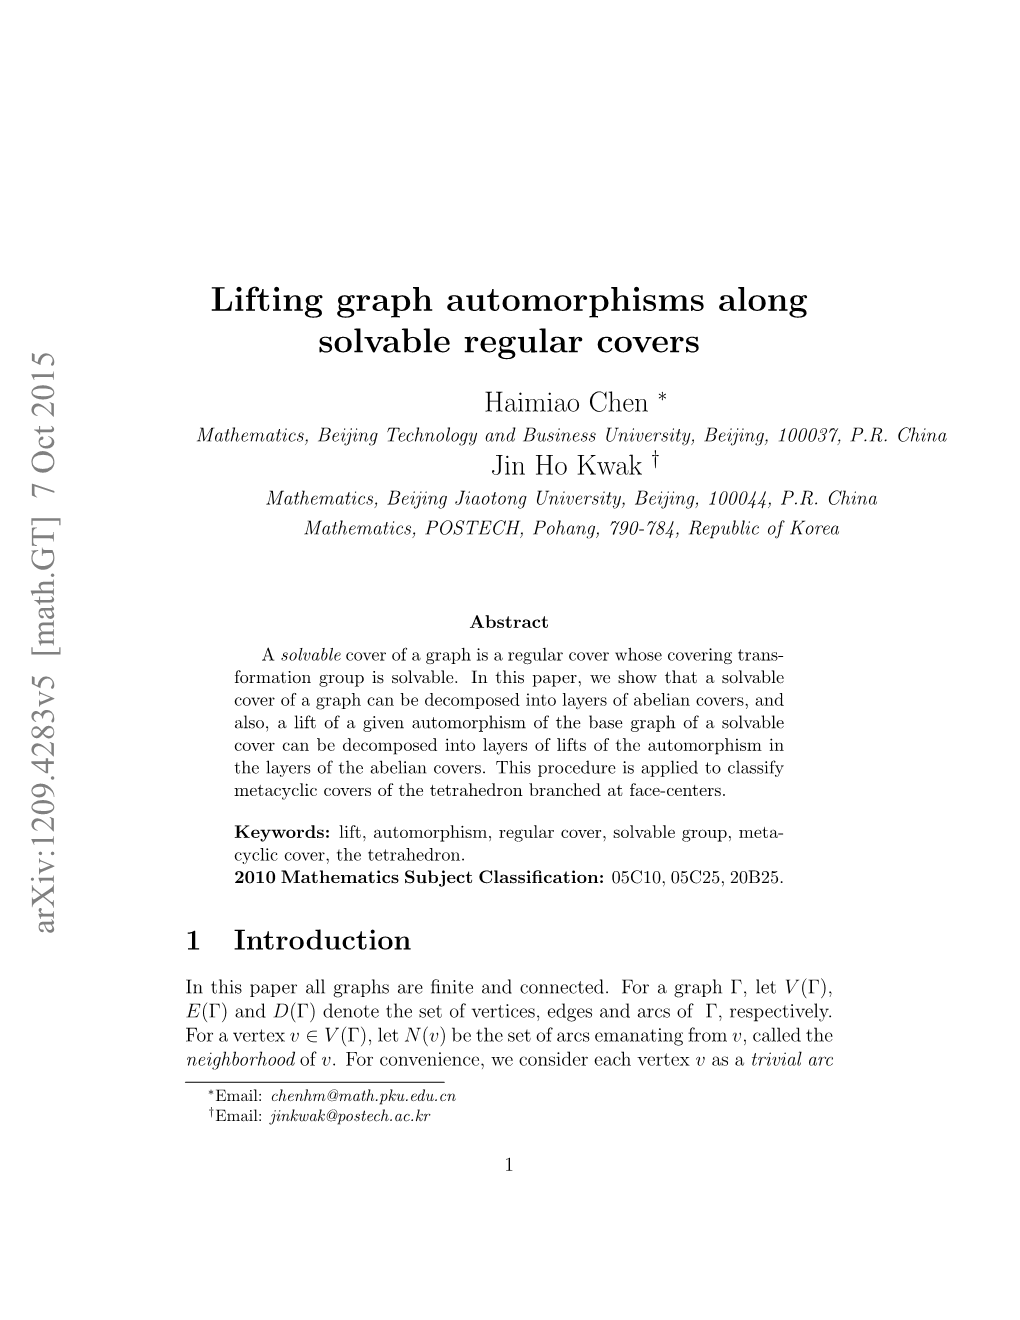 Lifting Graph Automorphisms Along Solvable Regular Covers